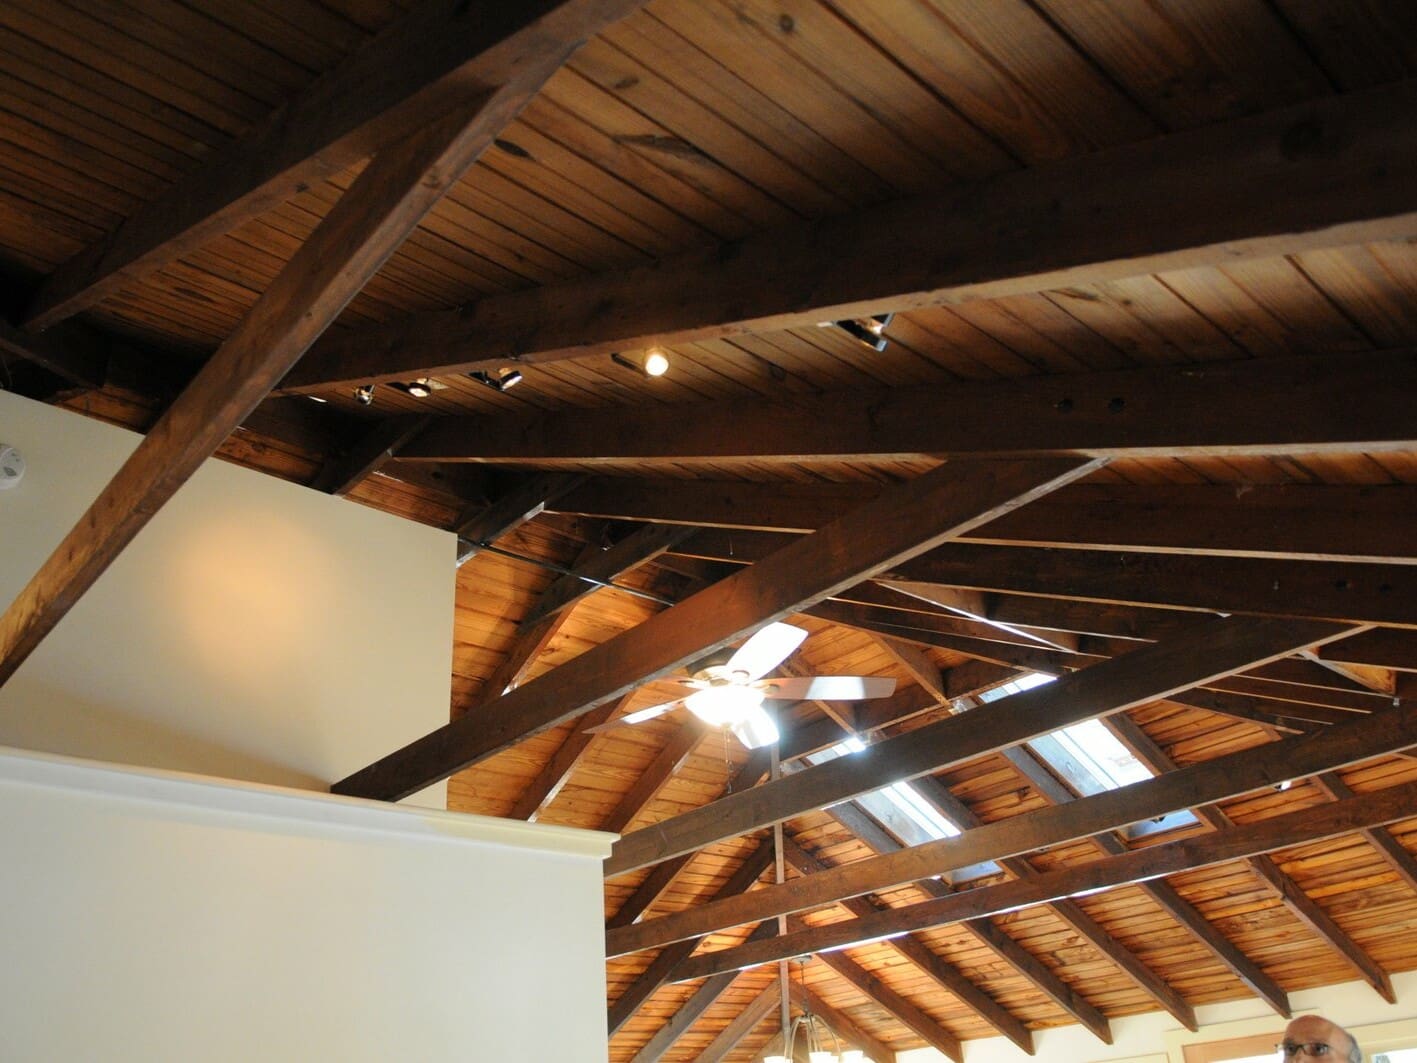 A photo of a large vaulted ceiling with supportive wooden beams.